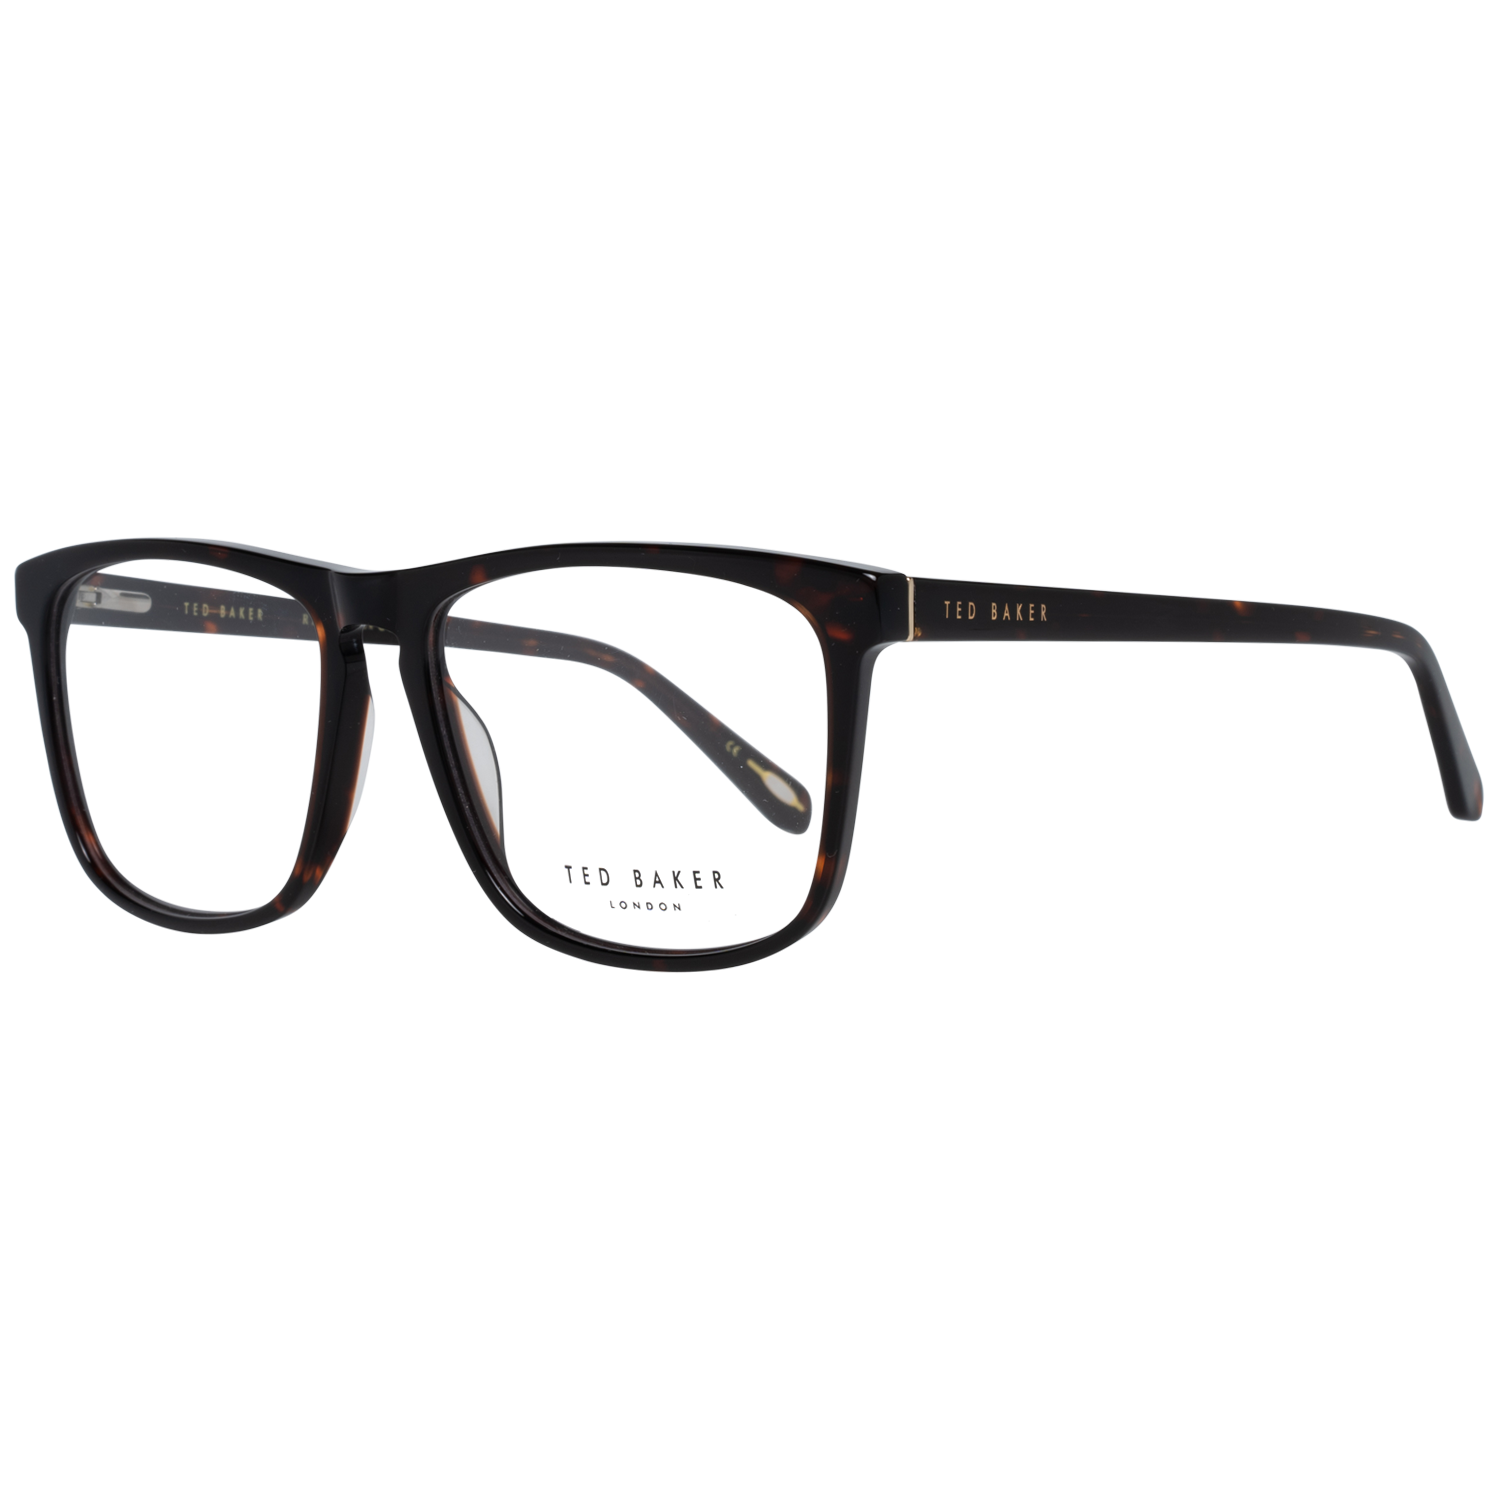 GenderMenMain colorBrownFrame colorBrownFrame materialPlasticSize56-16-145Lenses width56mmLenses heigth45mmBridge length16mmFrame width140mmTemple length145mmShipment includesCase, Cleaning clothStyleFull-RimSpring hingeNo